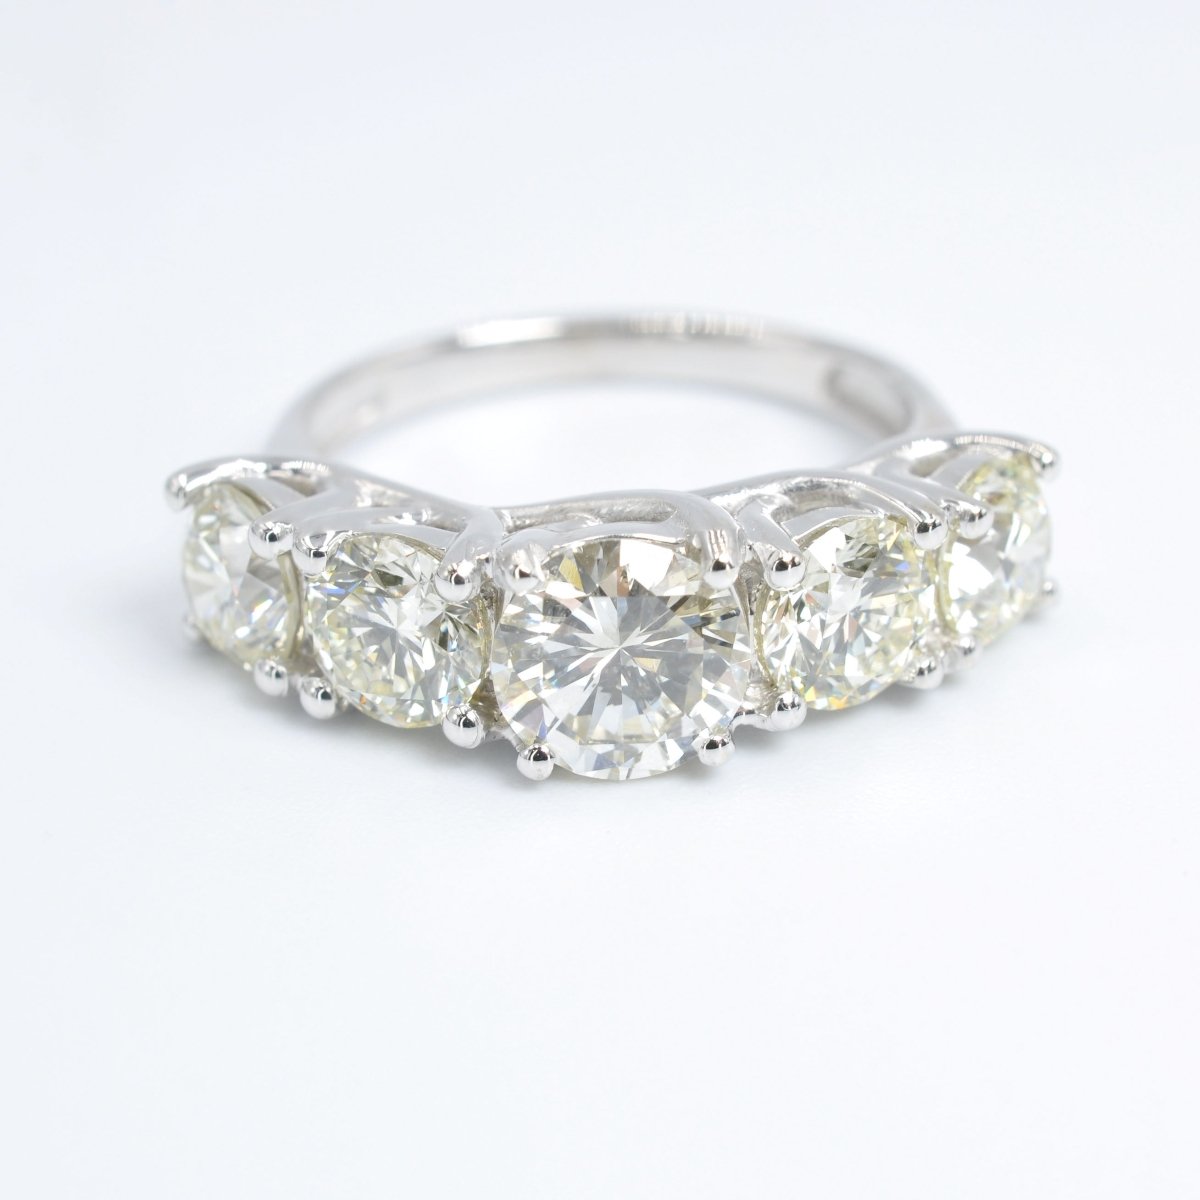 Certified 4.25CT Round Cut Engagement Ring in 14KT White Gold - Primestyle.com